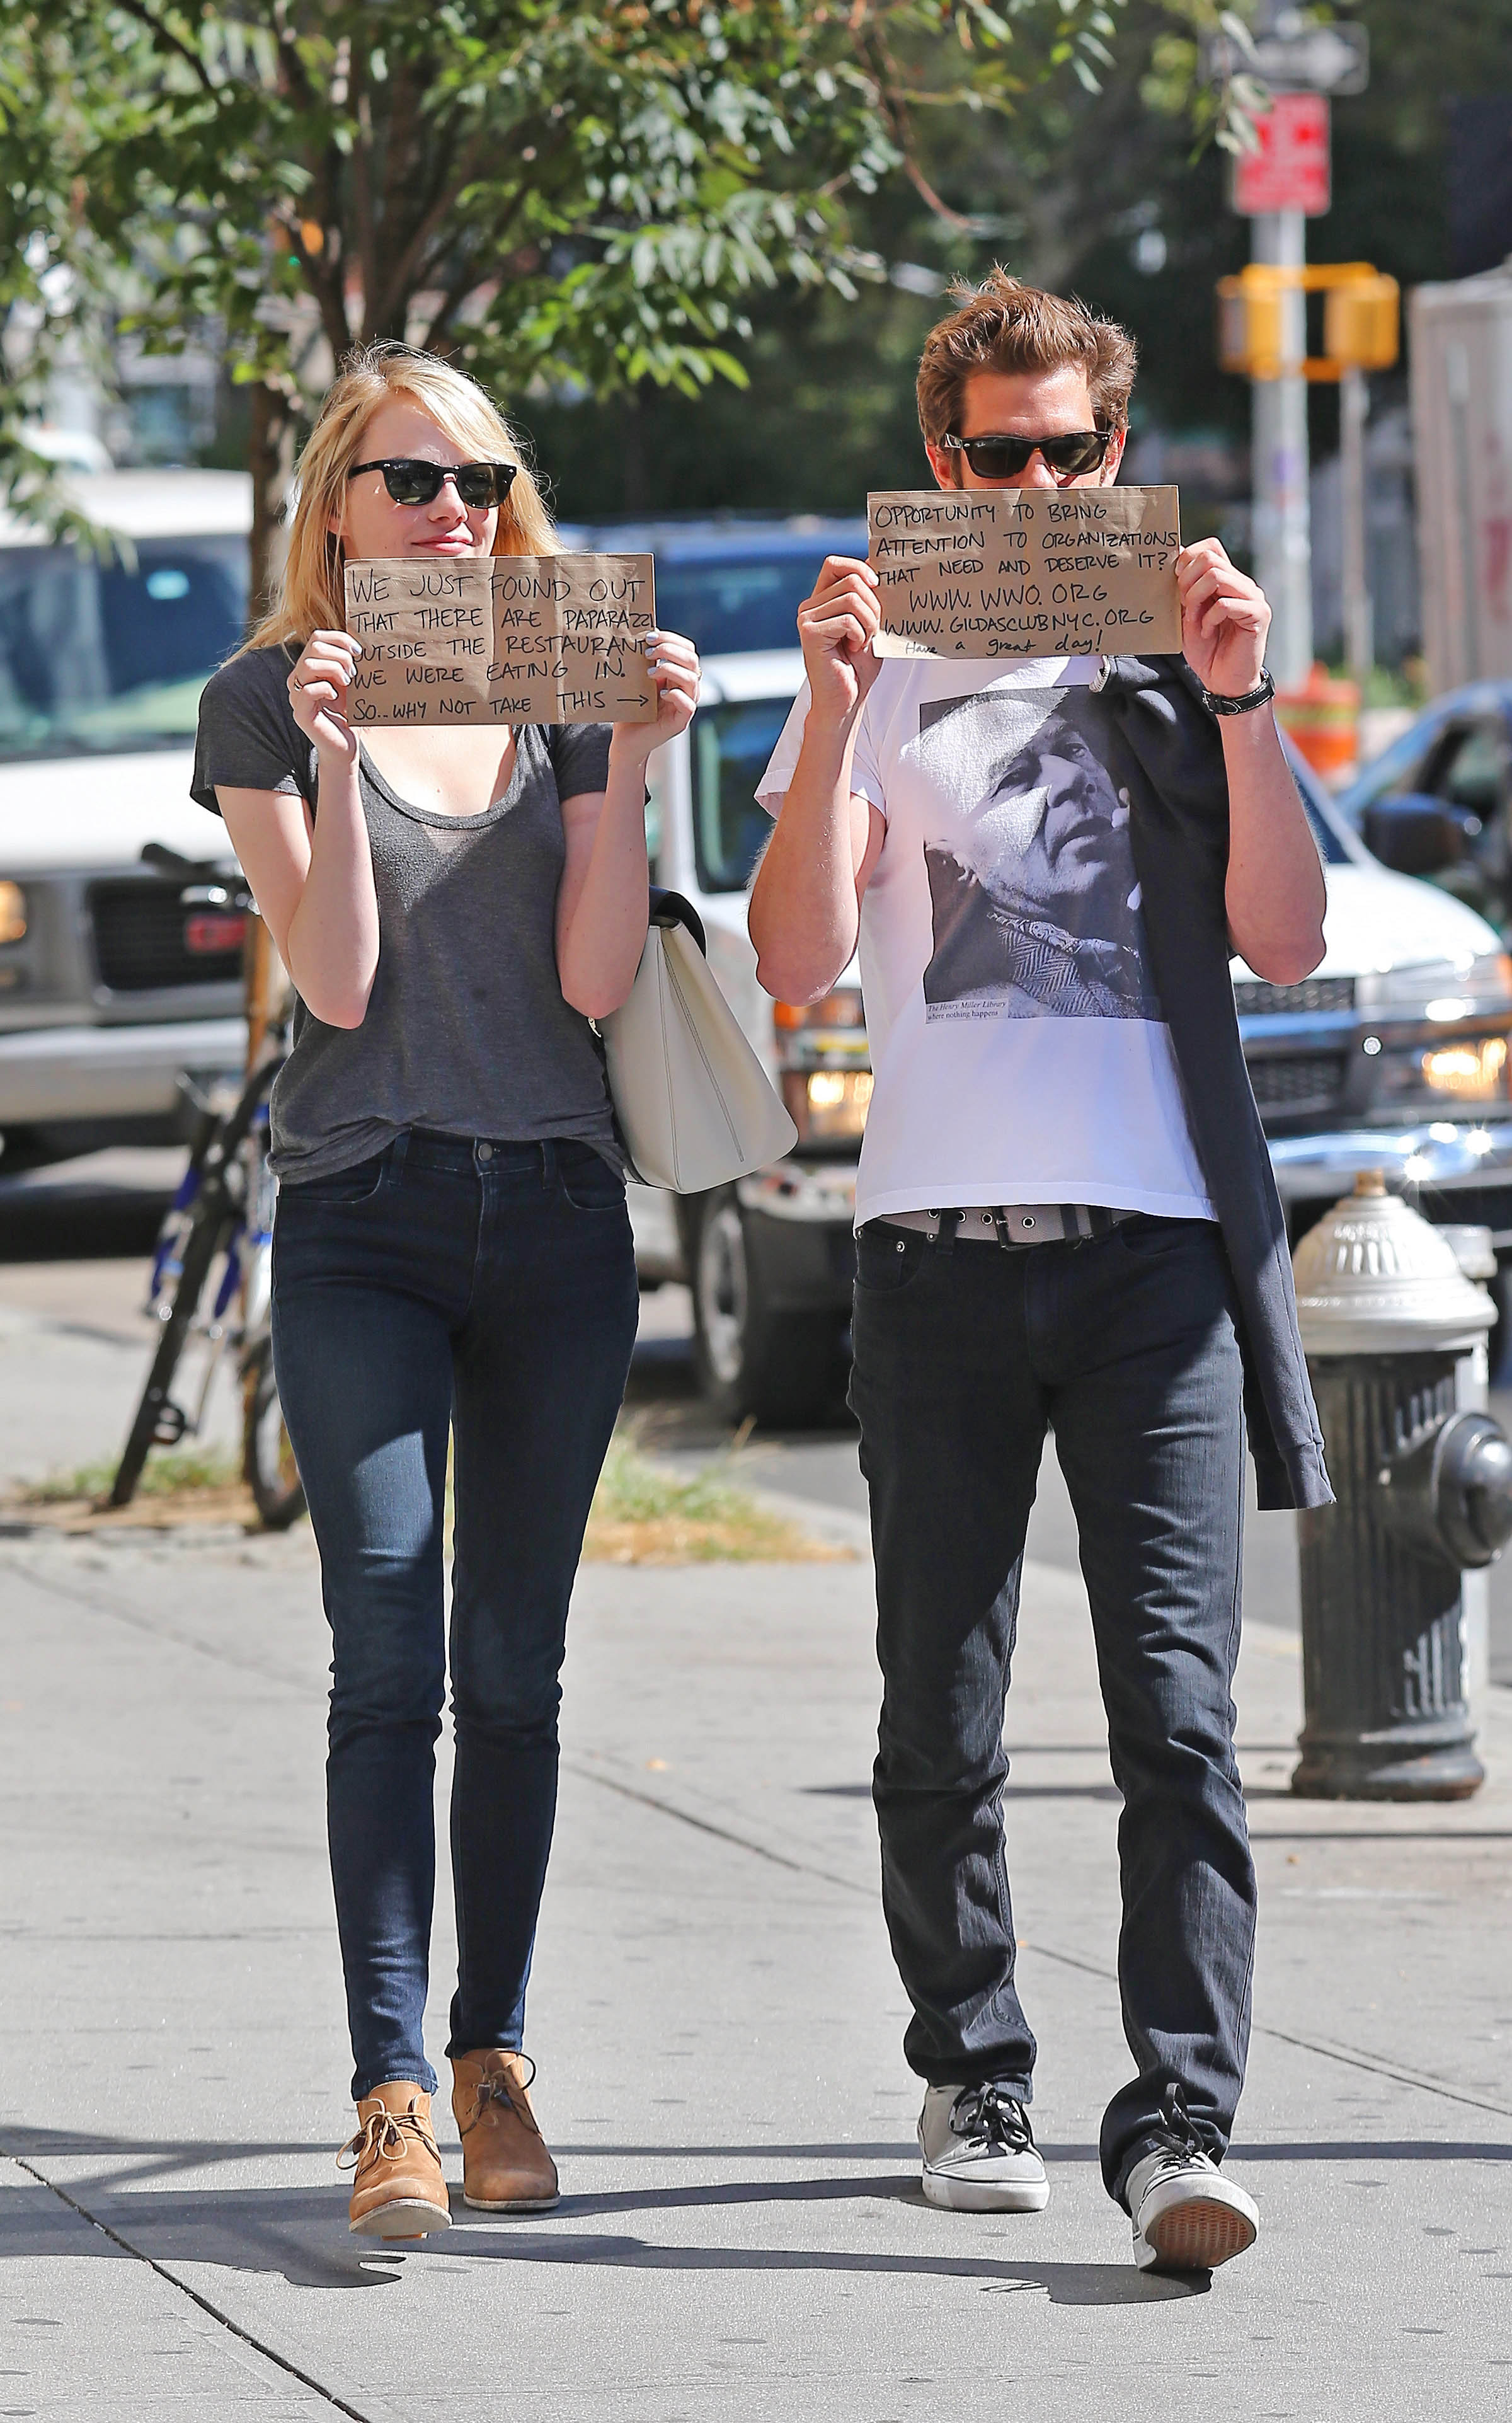 Emma Stone and Andrew Garfield use Paparazzi to promote charities